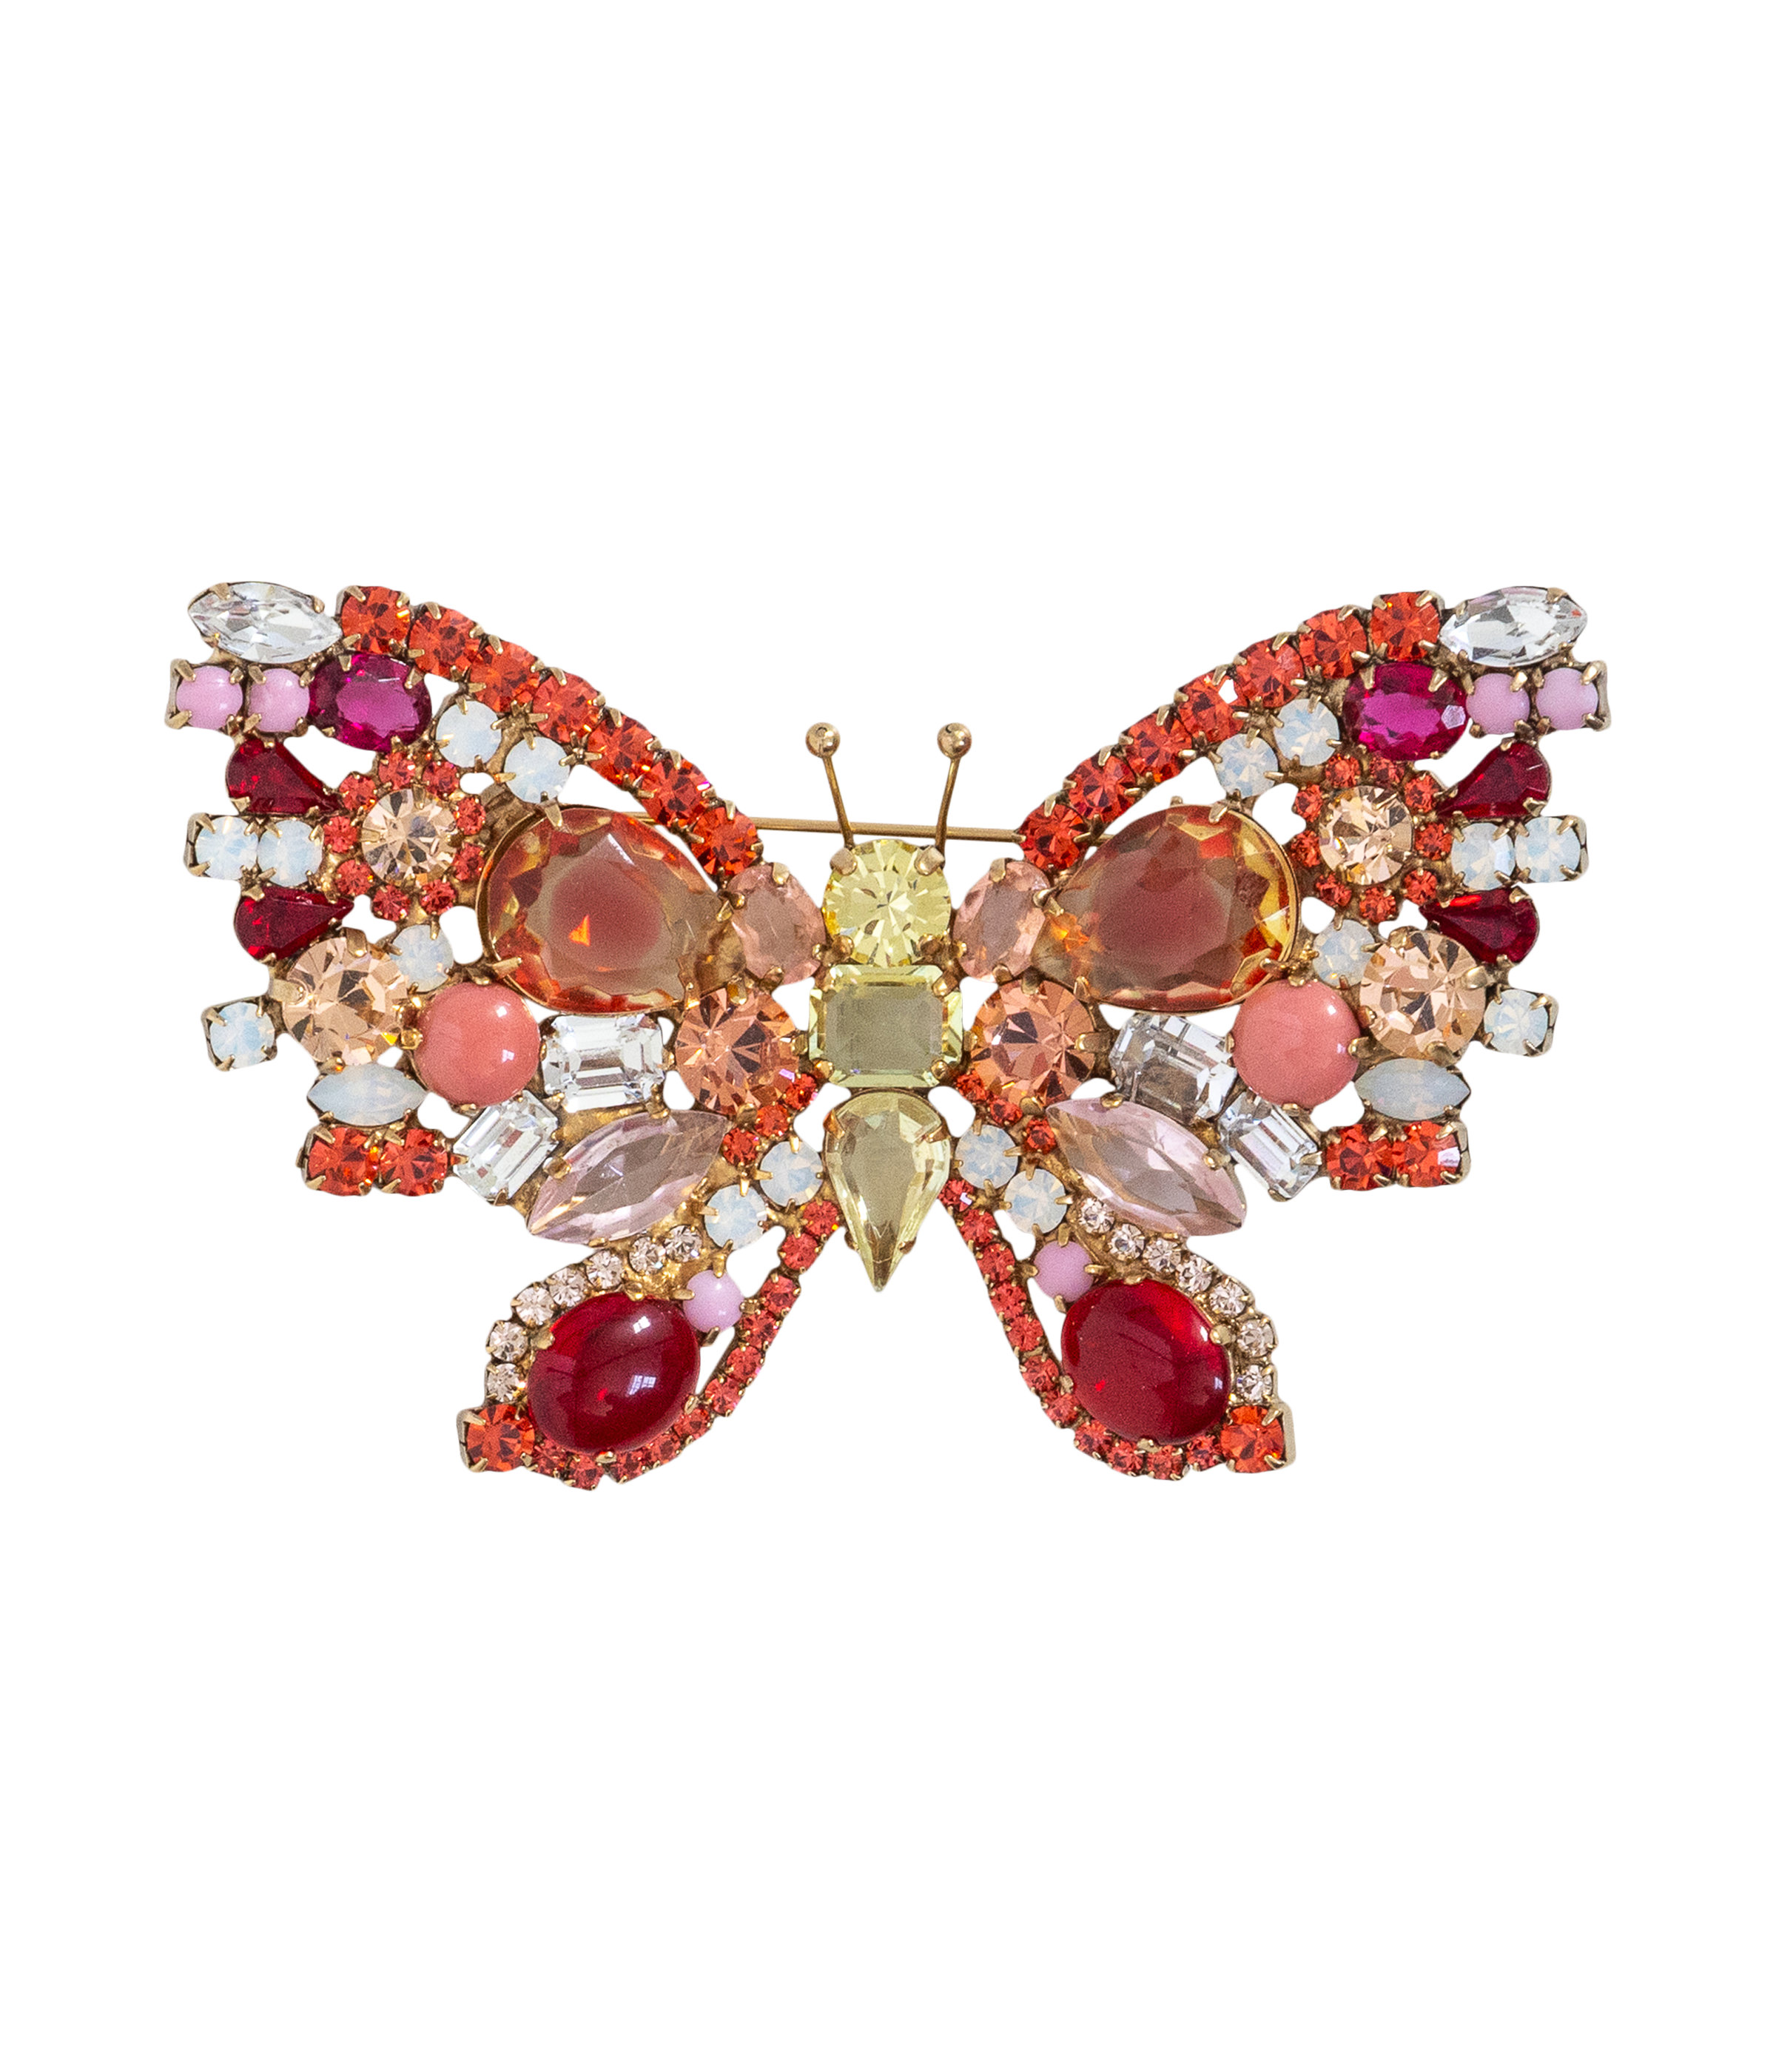 Large Butterfly in Padparadscha / Jonquil / Crystal